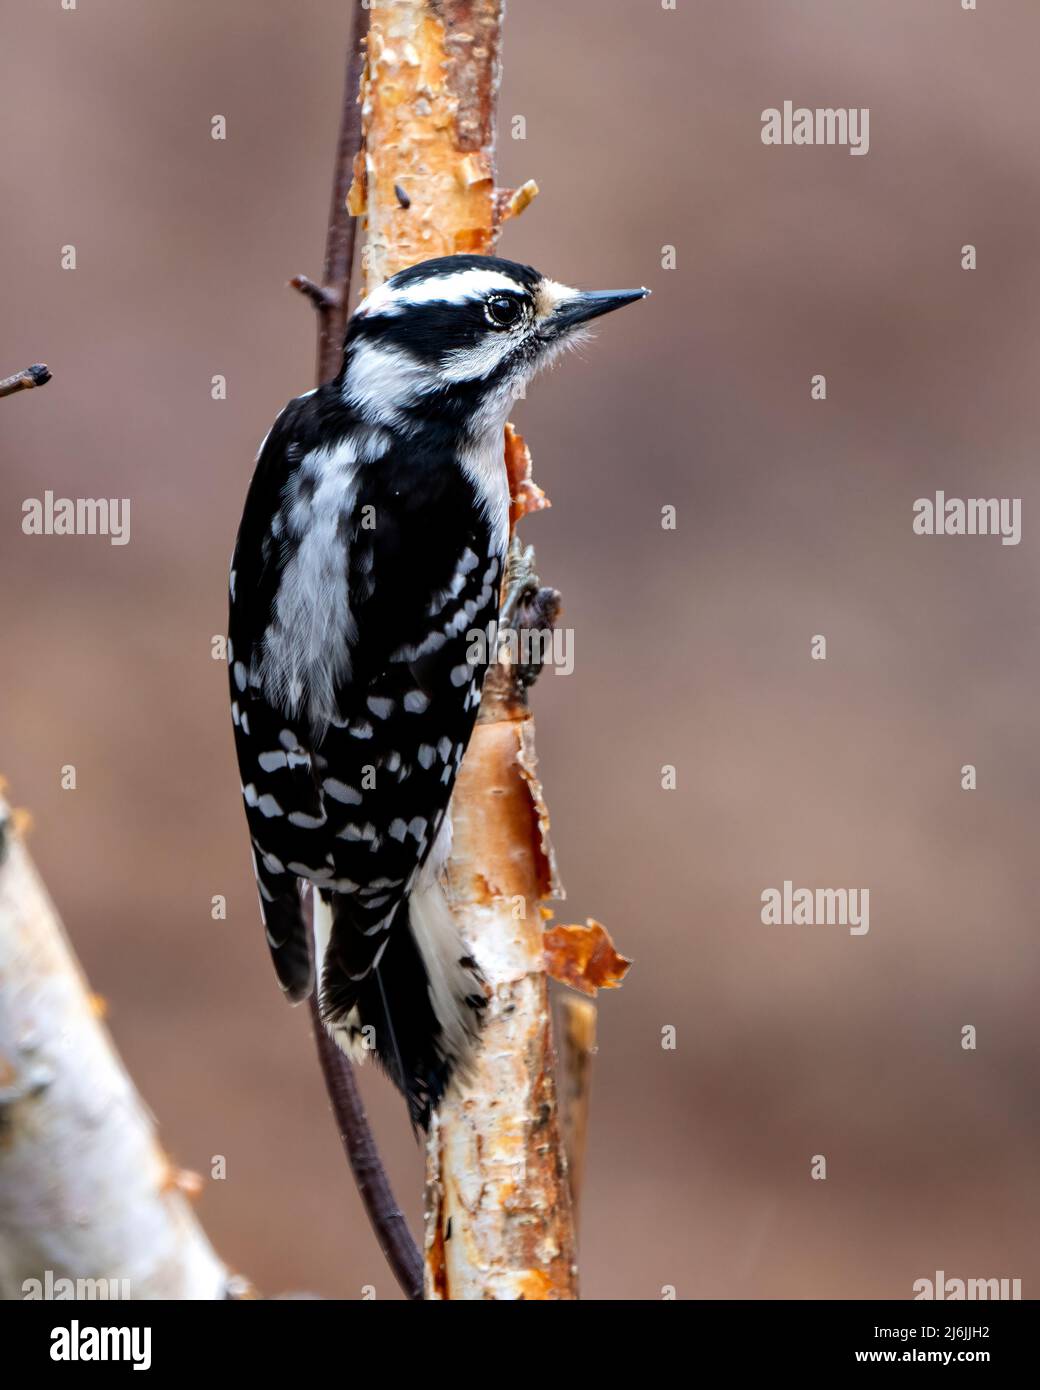 Woodpecker female close-up profile view perched on a tree branch with blur background in its environment and habitat. Image. Picture. Portrait. Stock Photo